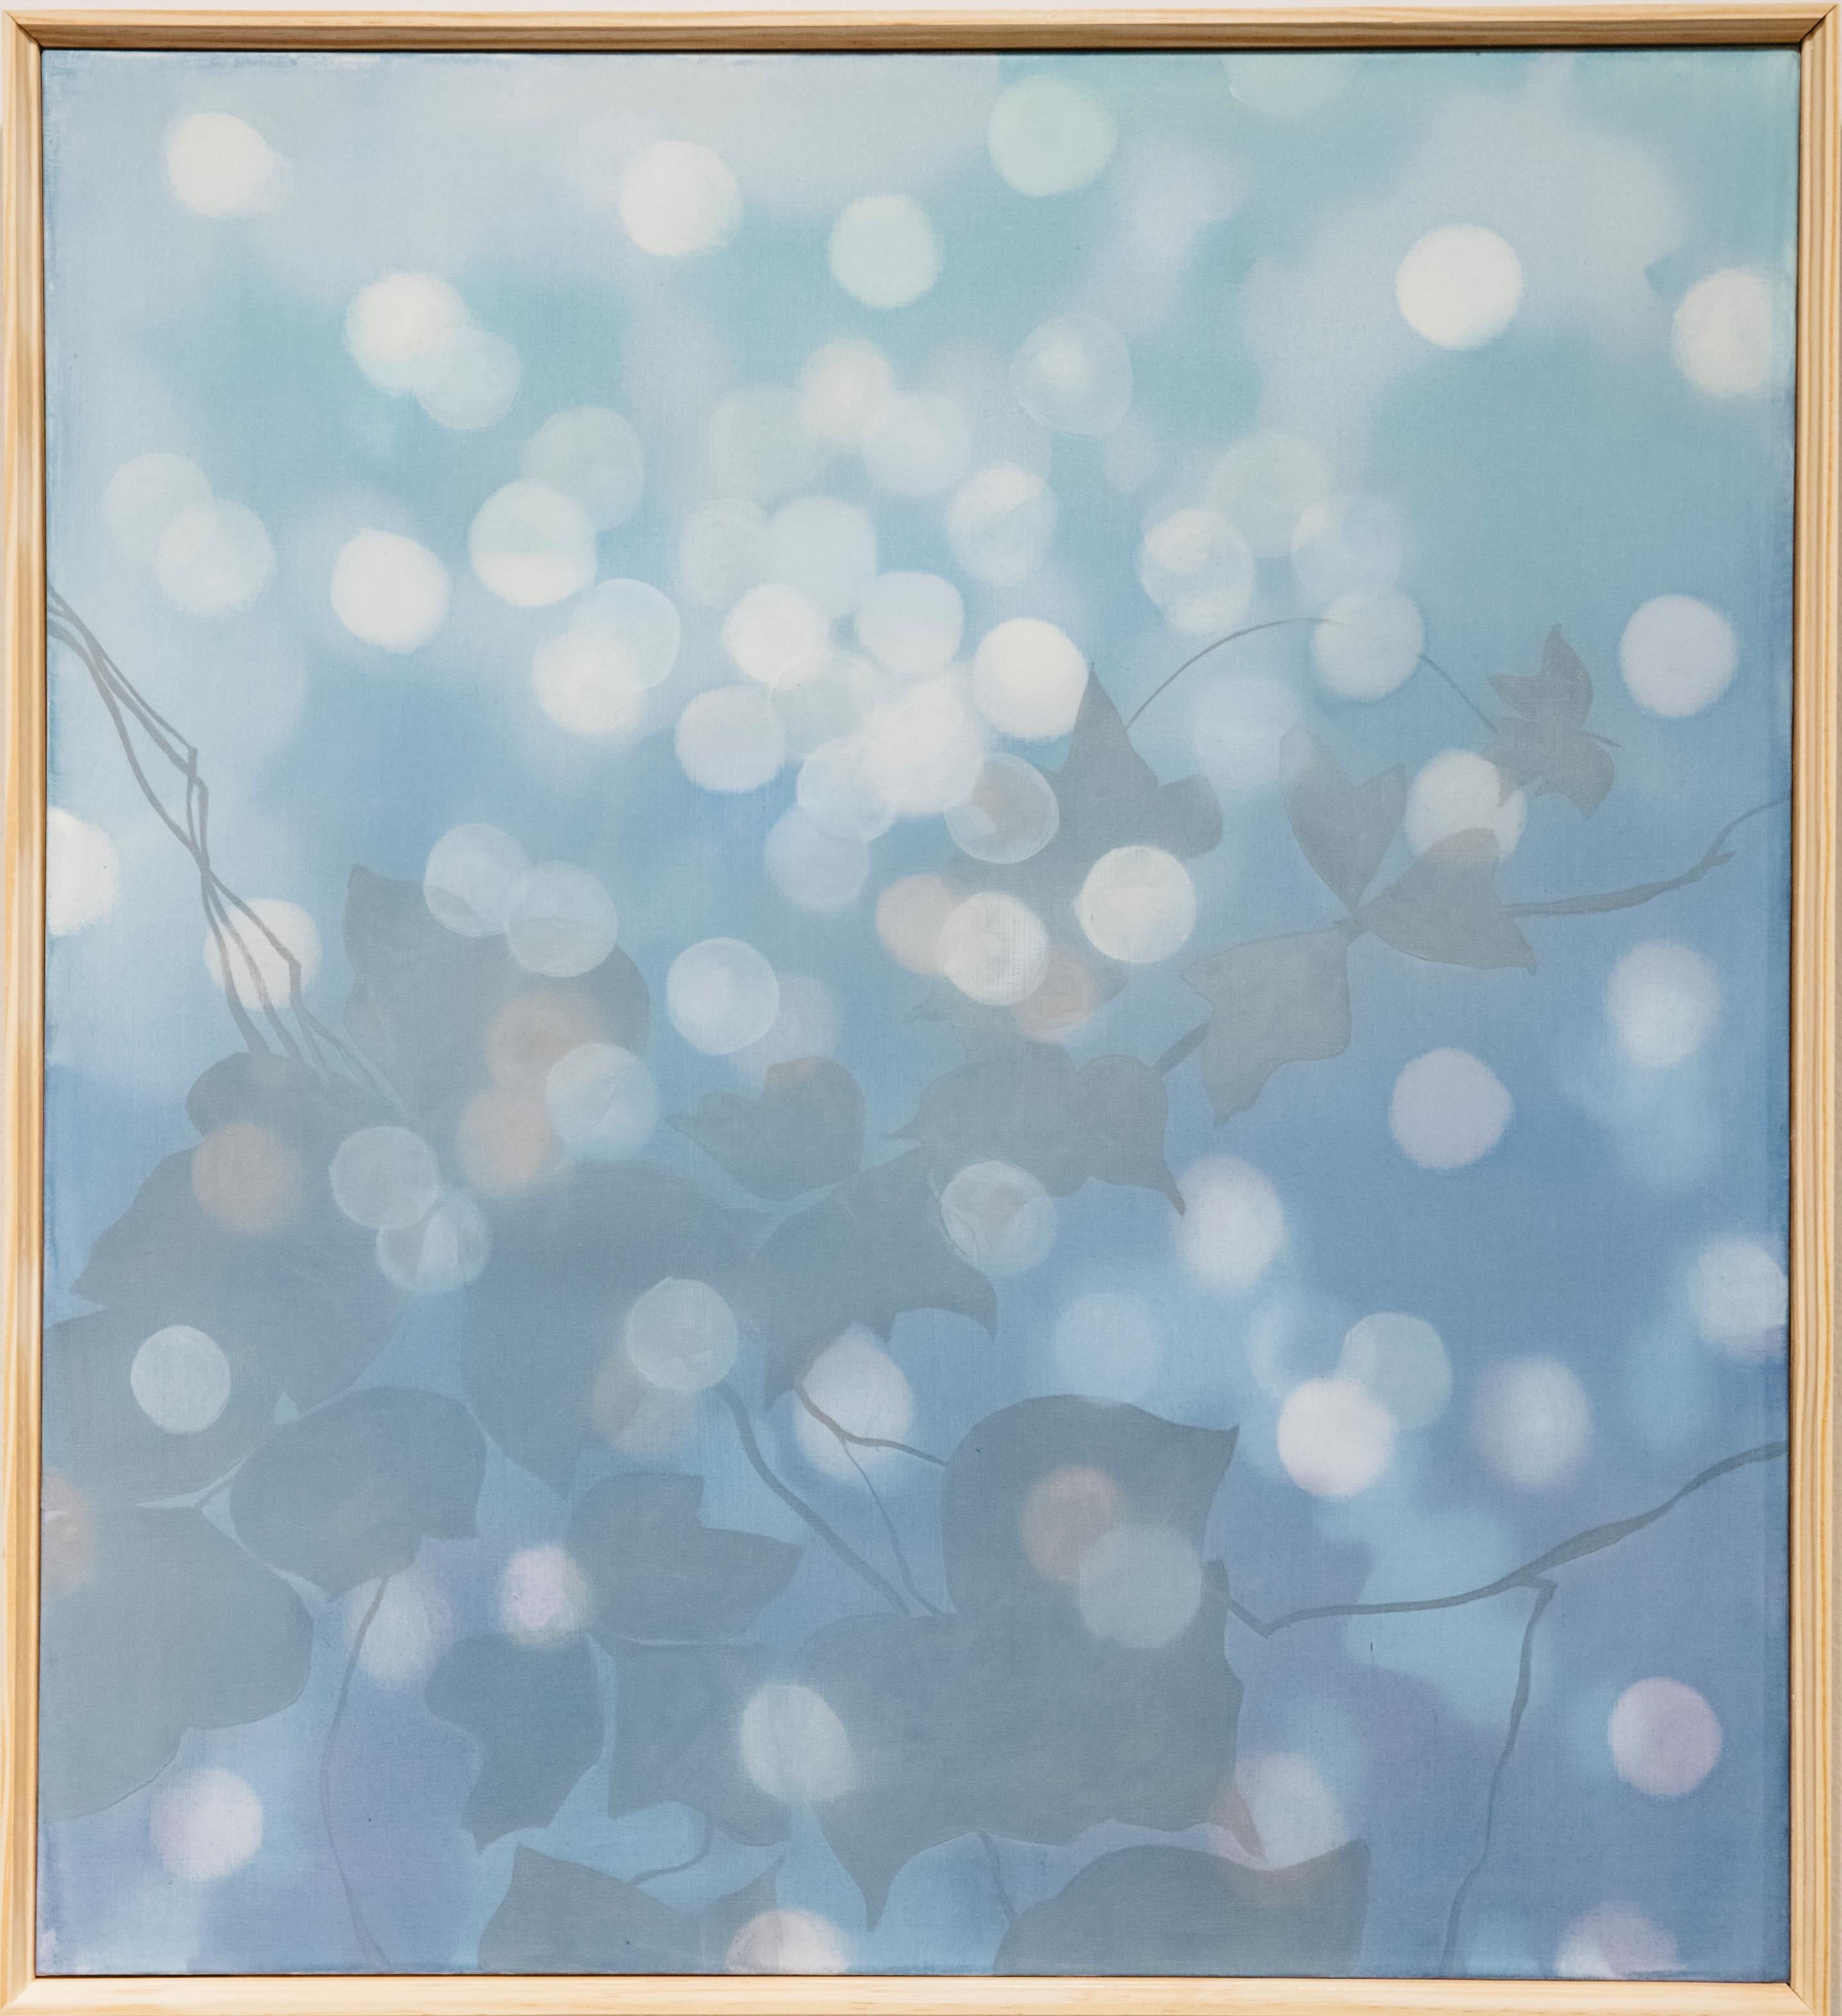 LUSH - Blue atmospheric painting of Kudzu vines and light spots, layered - Painting by Heather Hartman